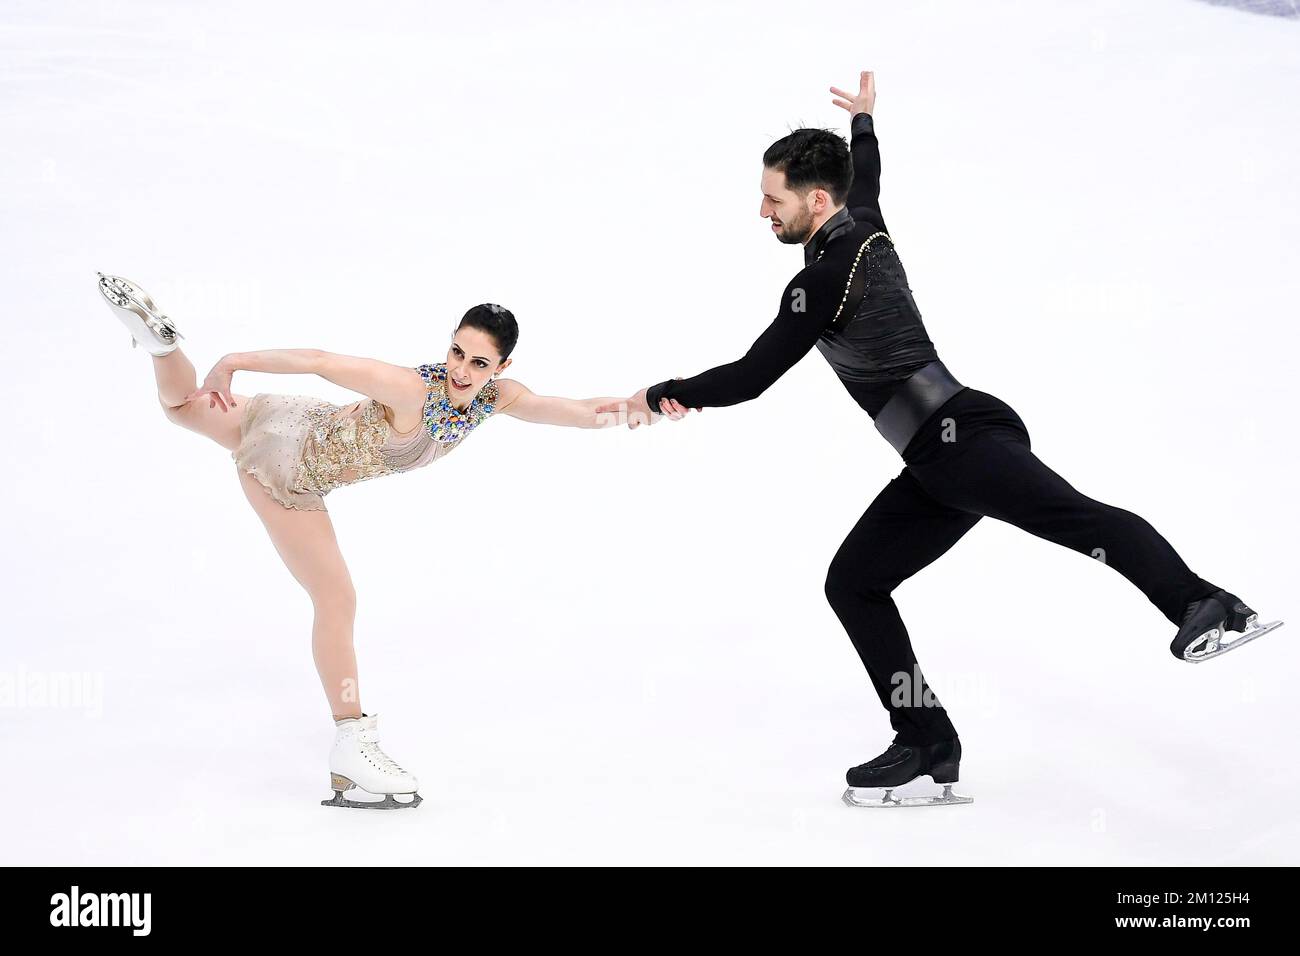 Turin, Italy. 09 December 2022. Deanna Stellato-Dudek and Maxime Deschamps of Canada perform in the Pairs Free Skating during day two of the ISU Grand Prix of Figure Skating Final. Credit: Nicolò Campo/Alamy Live News Stock Photo